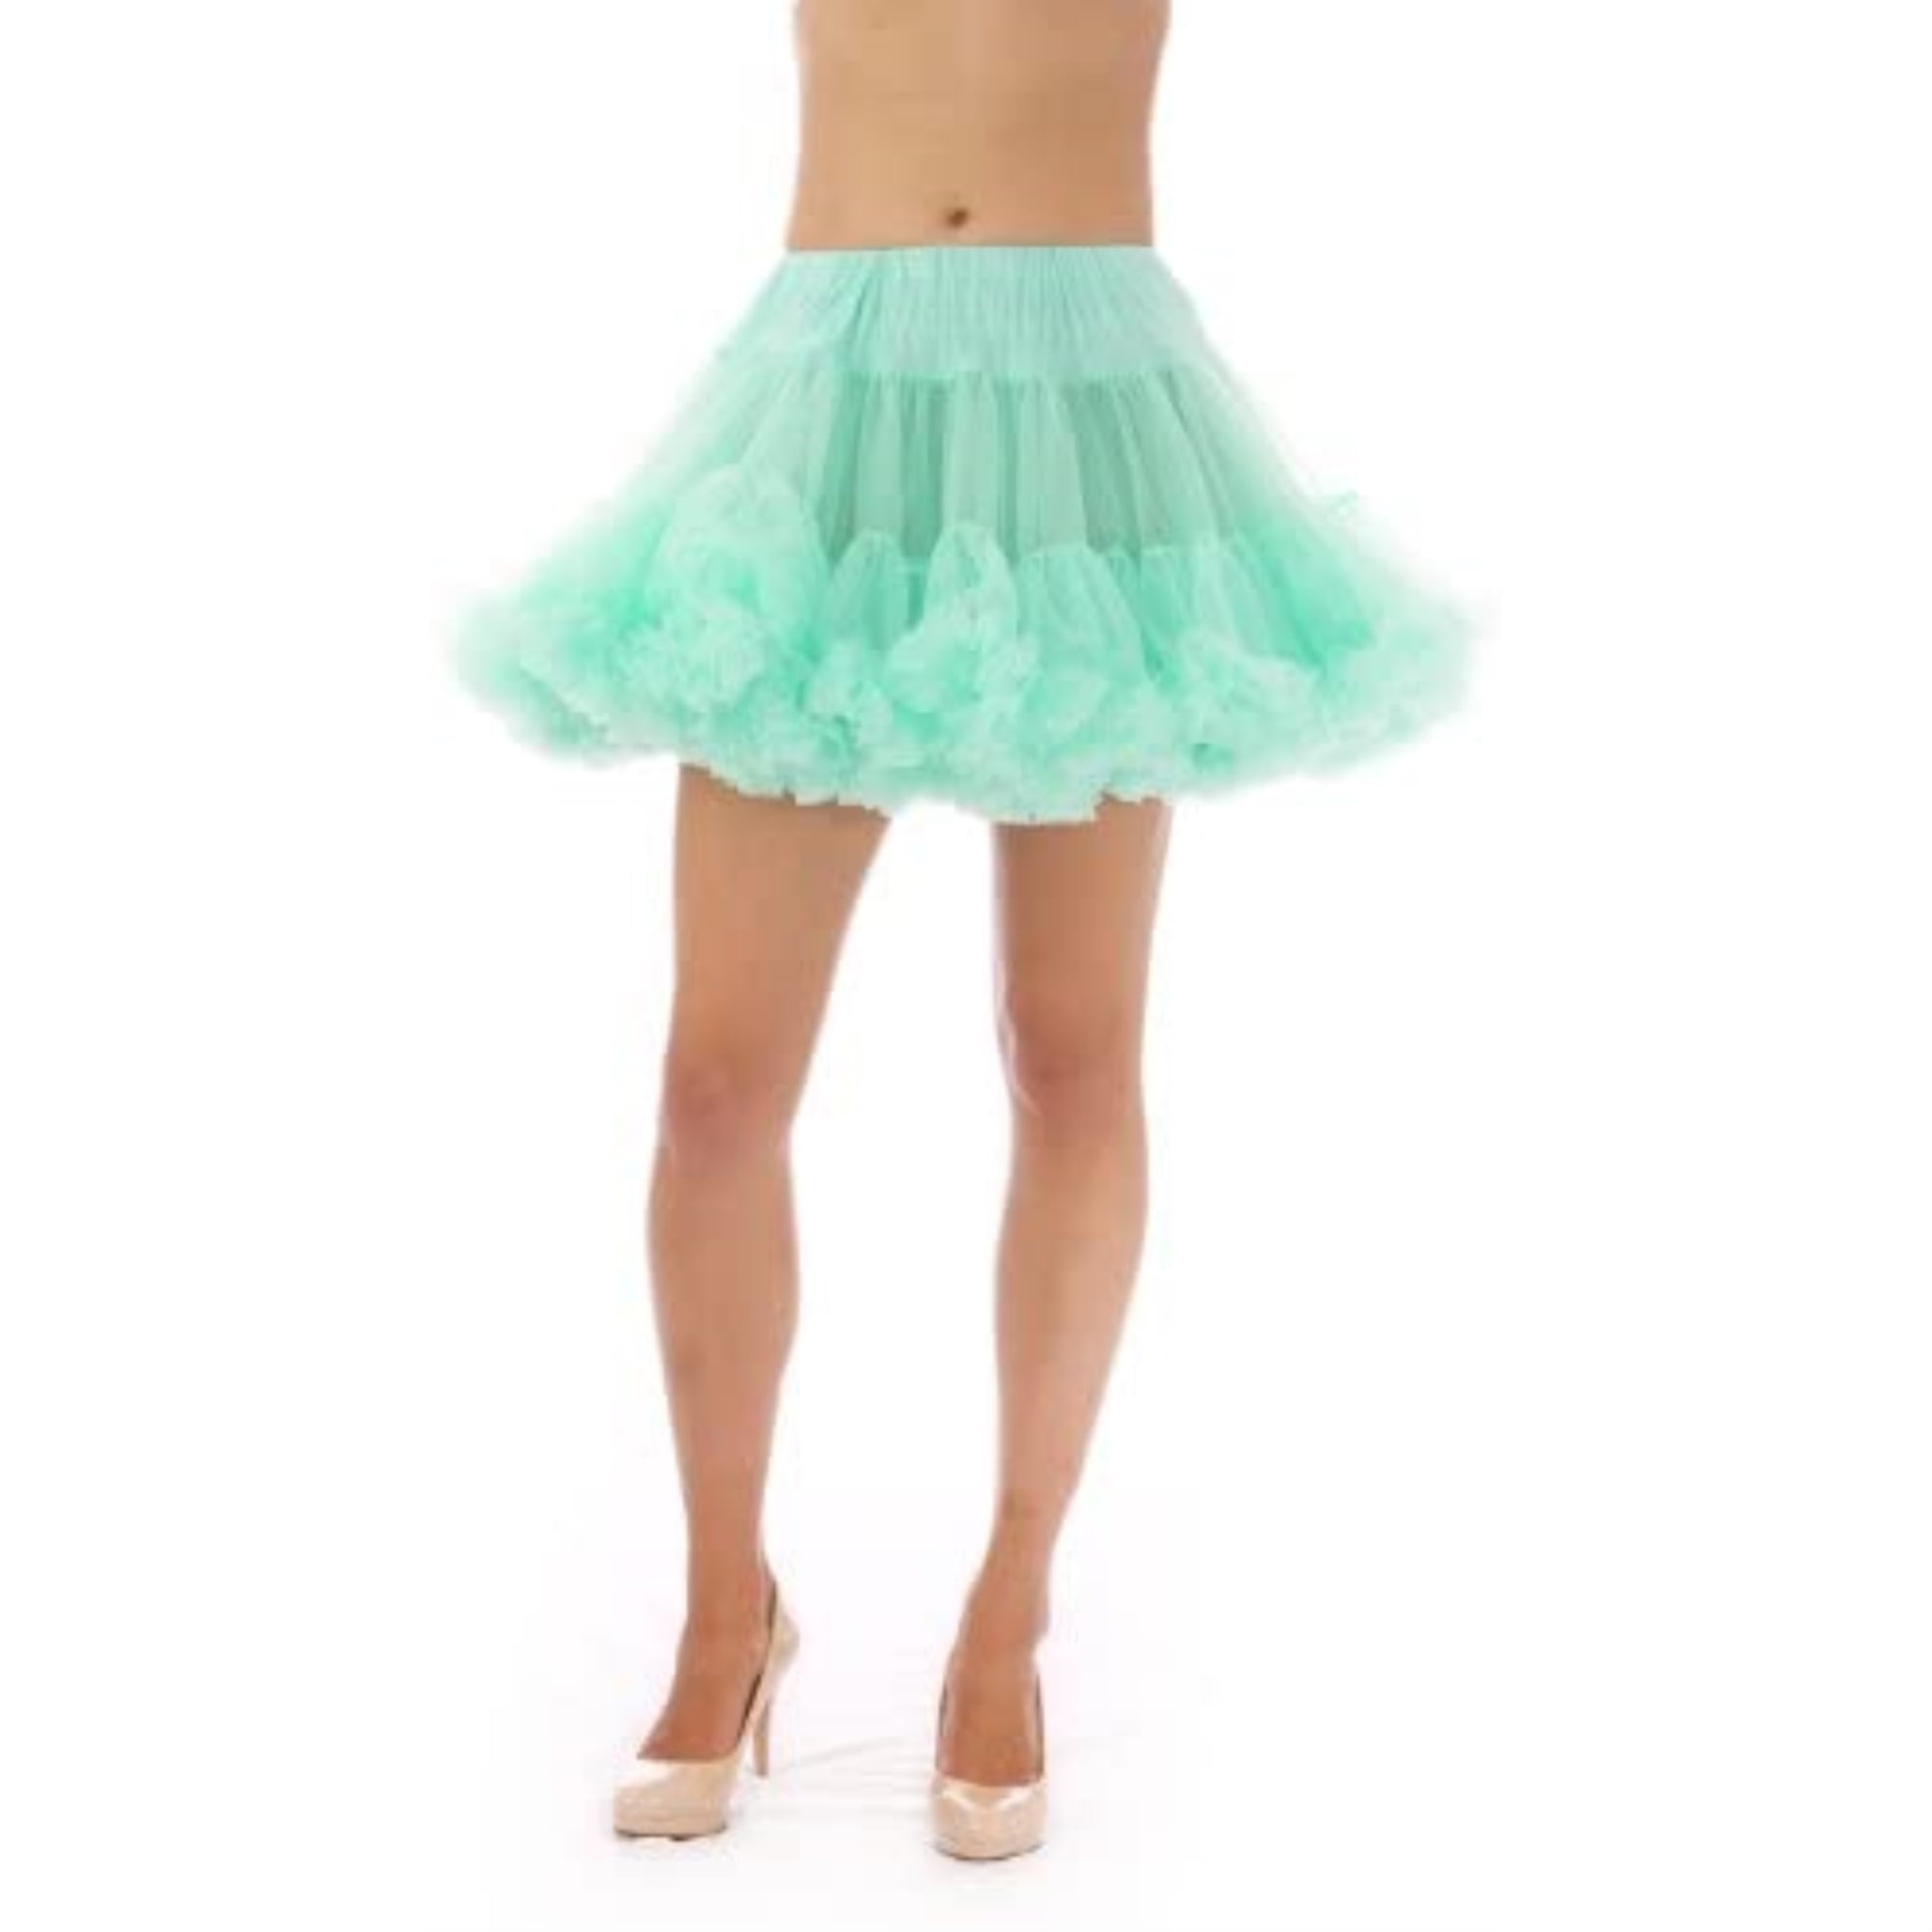 Legal Age Teenager looks sexy with her legs up petticoat